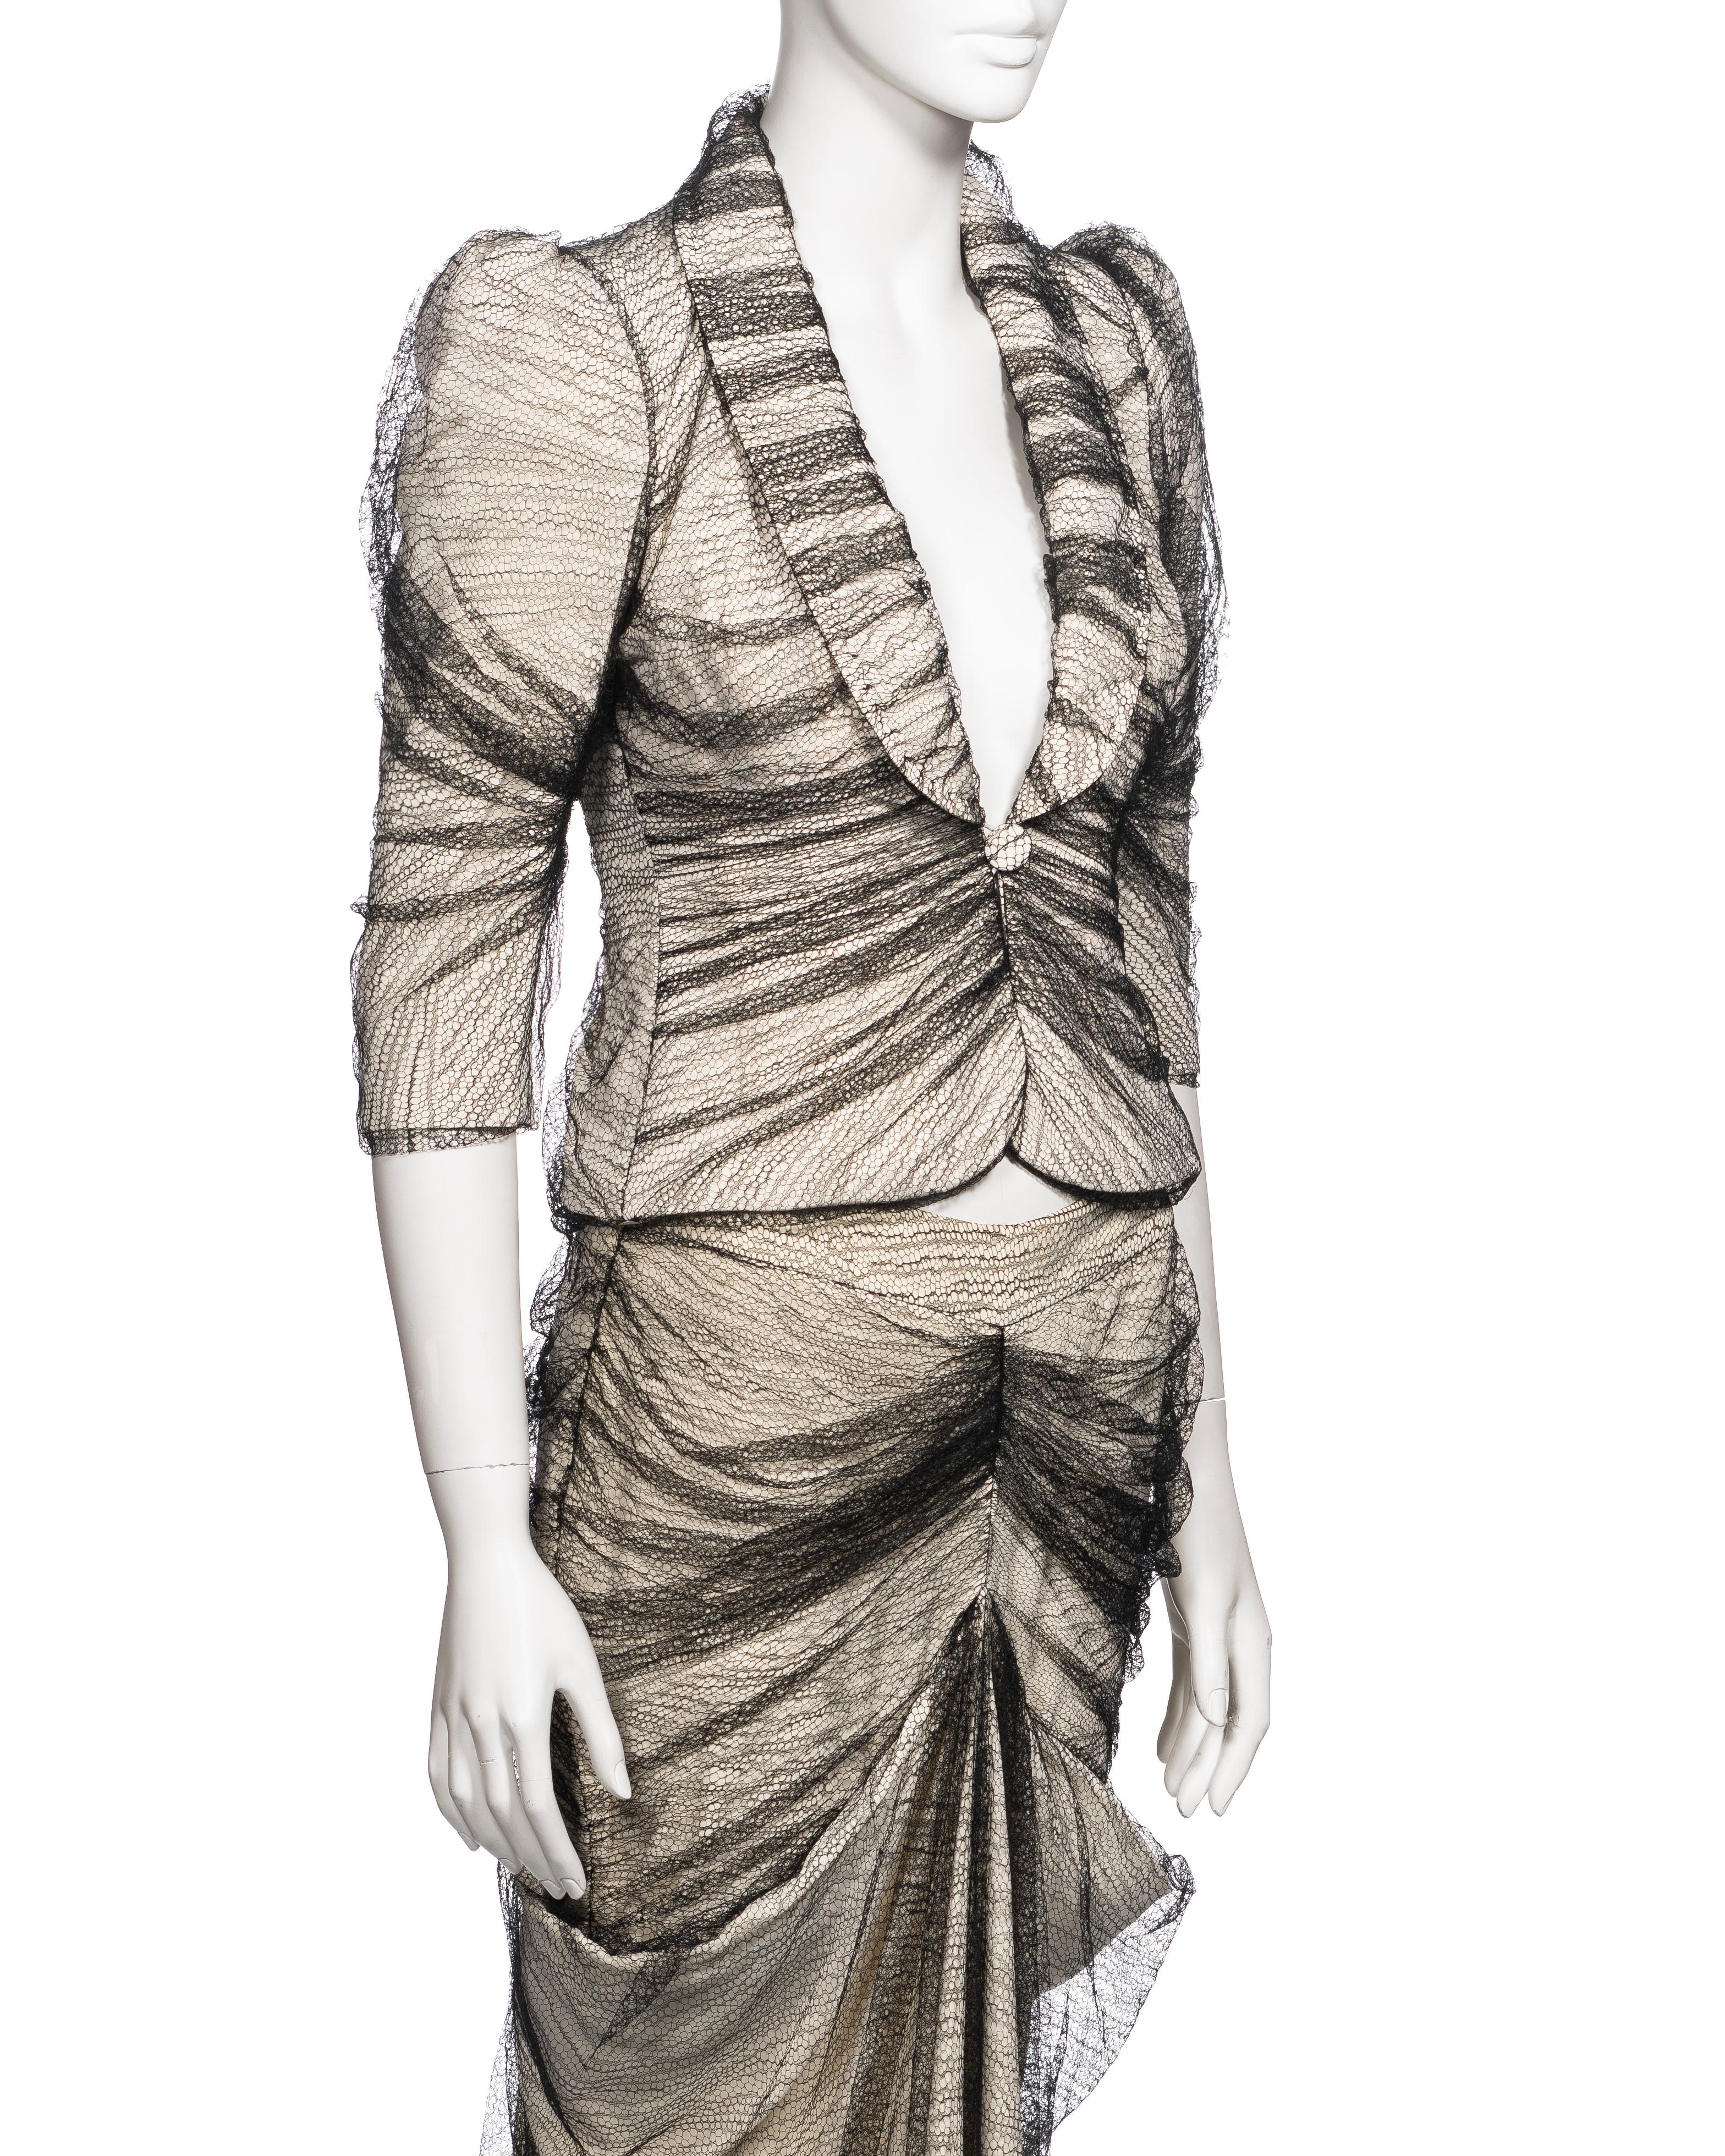 Alexander McQueen 'Sarabande' Ivory Skirt Suit with Black Lace Overlay, SS 2007 For Sale 4